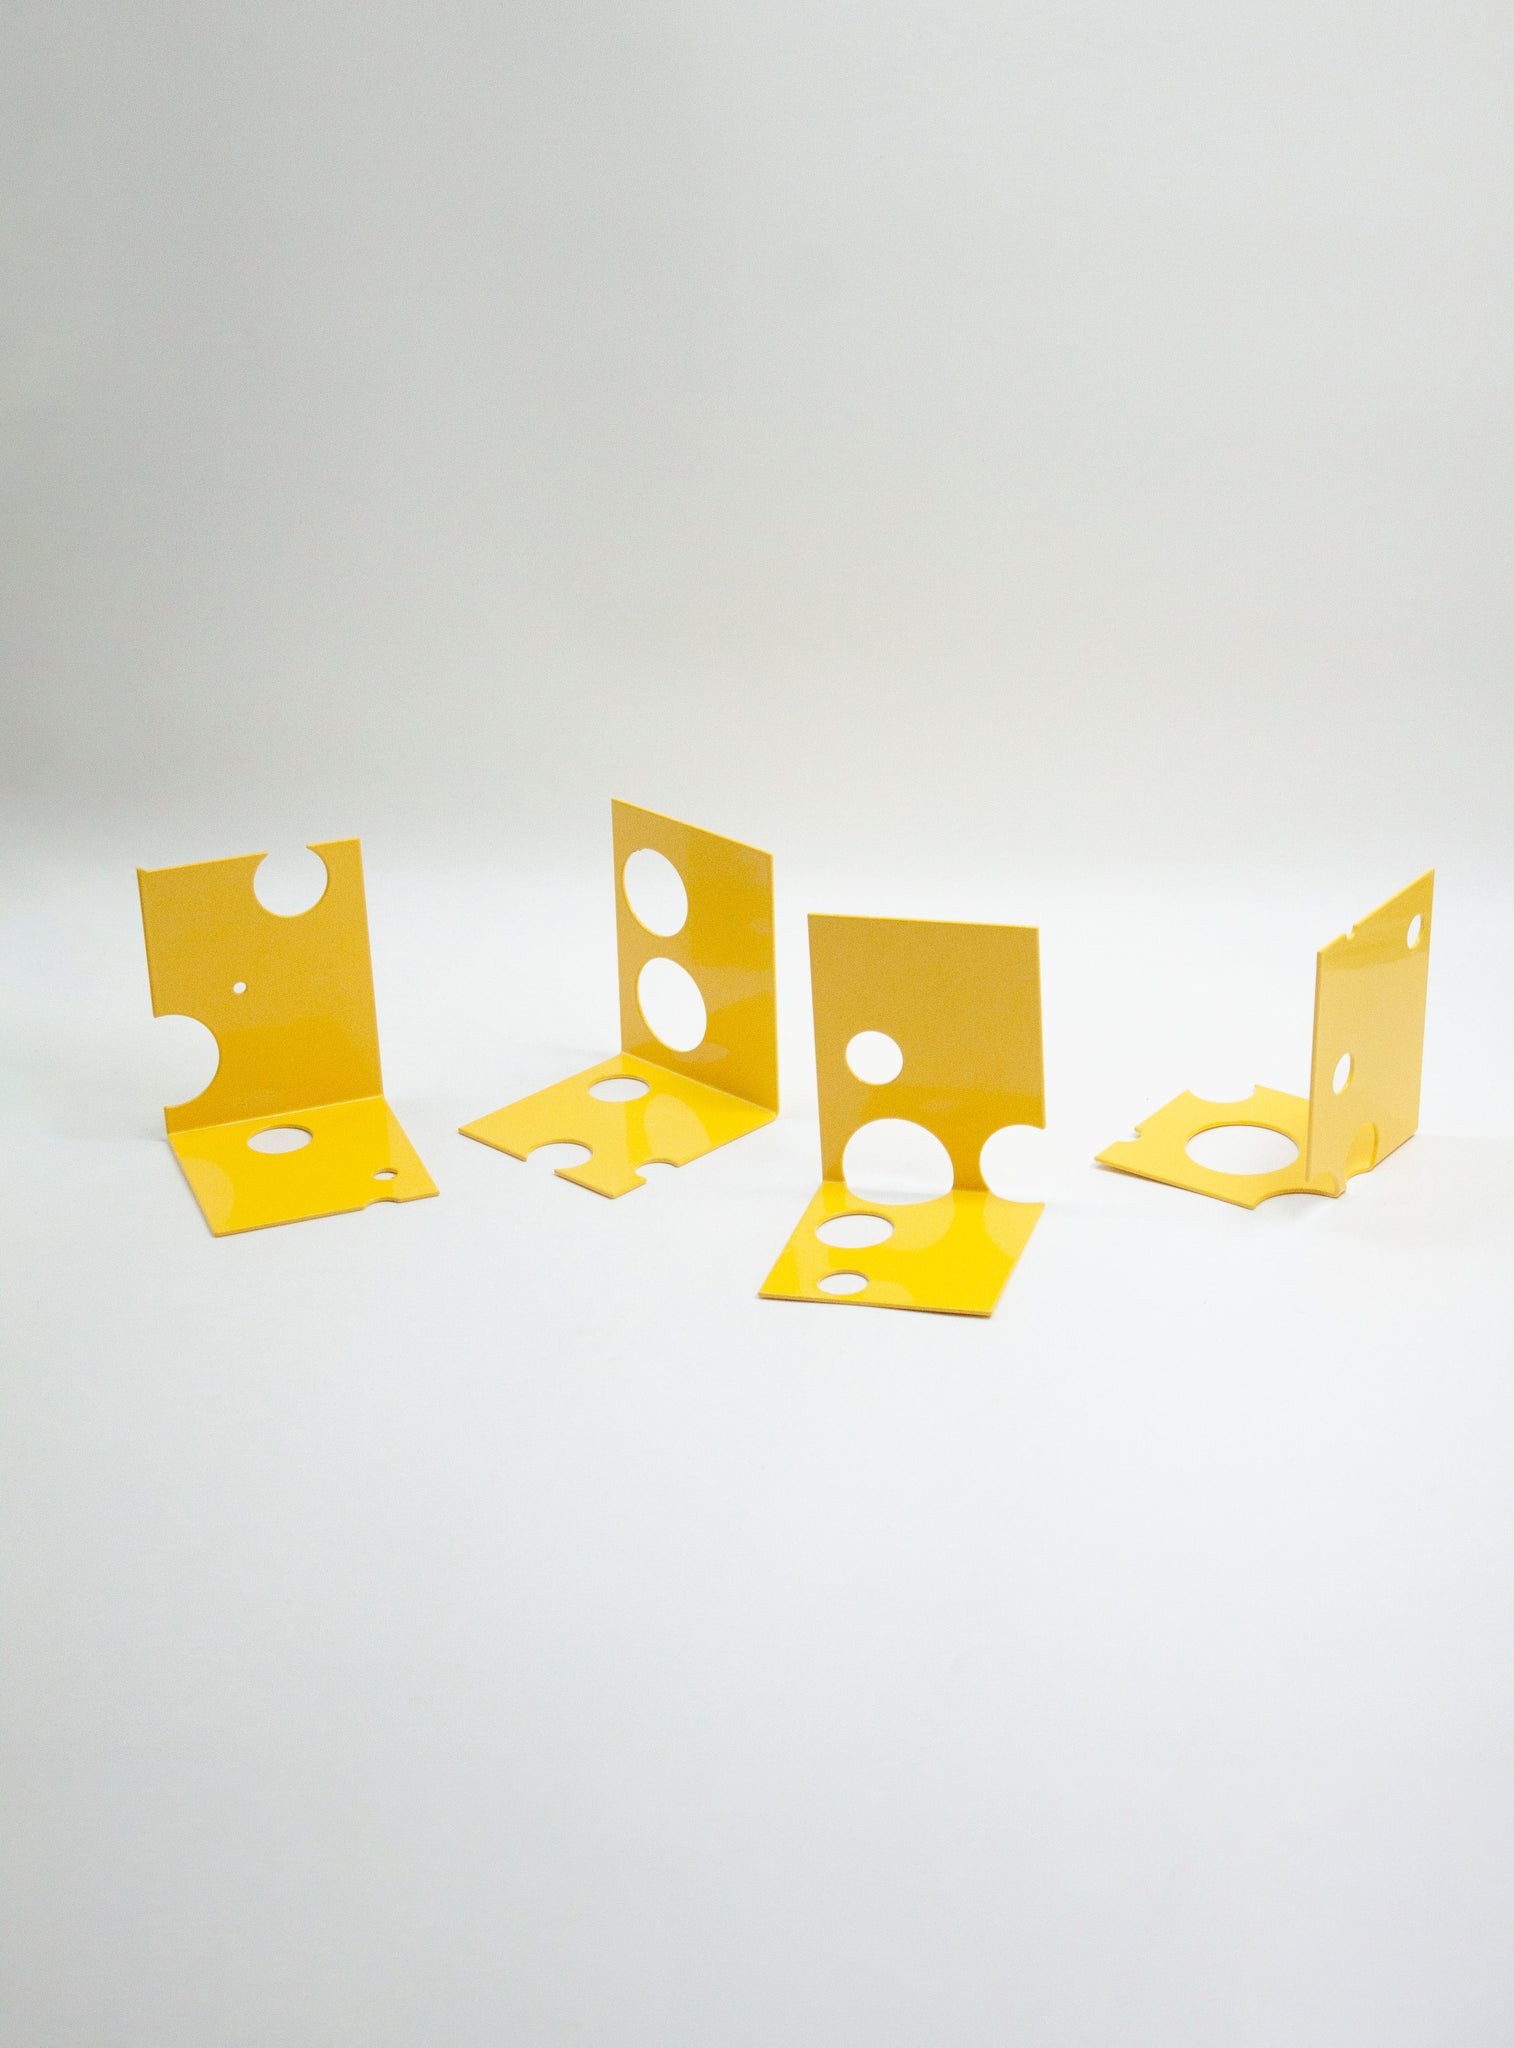 New Fromage Bookends by ErtlundZull